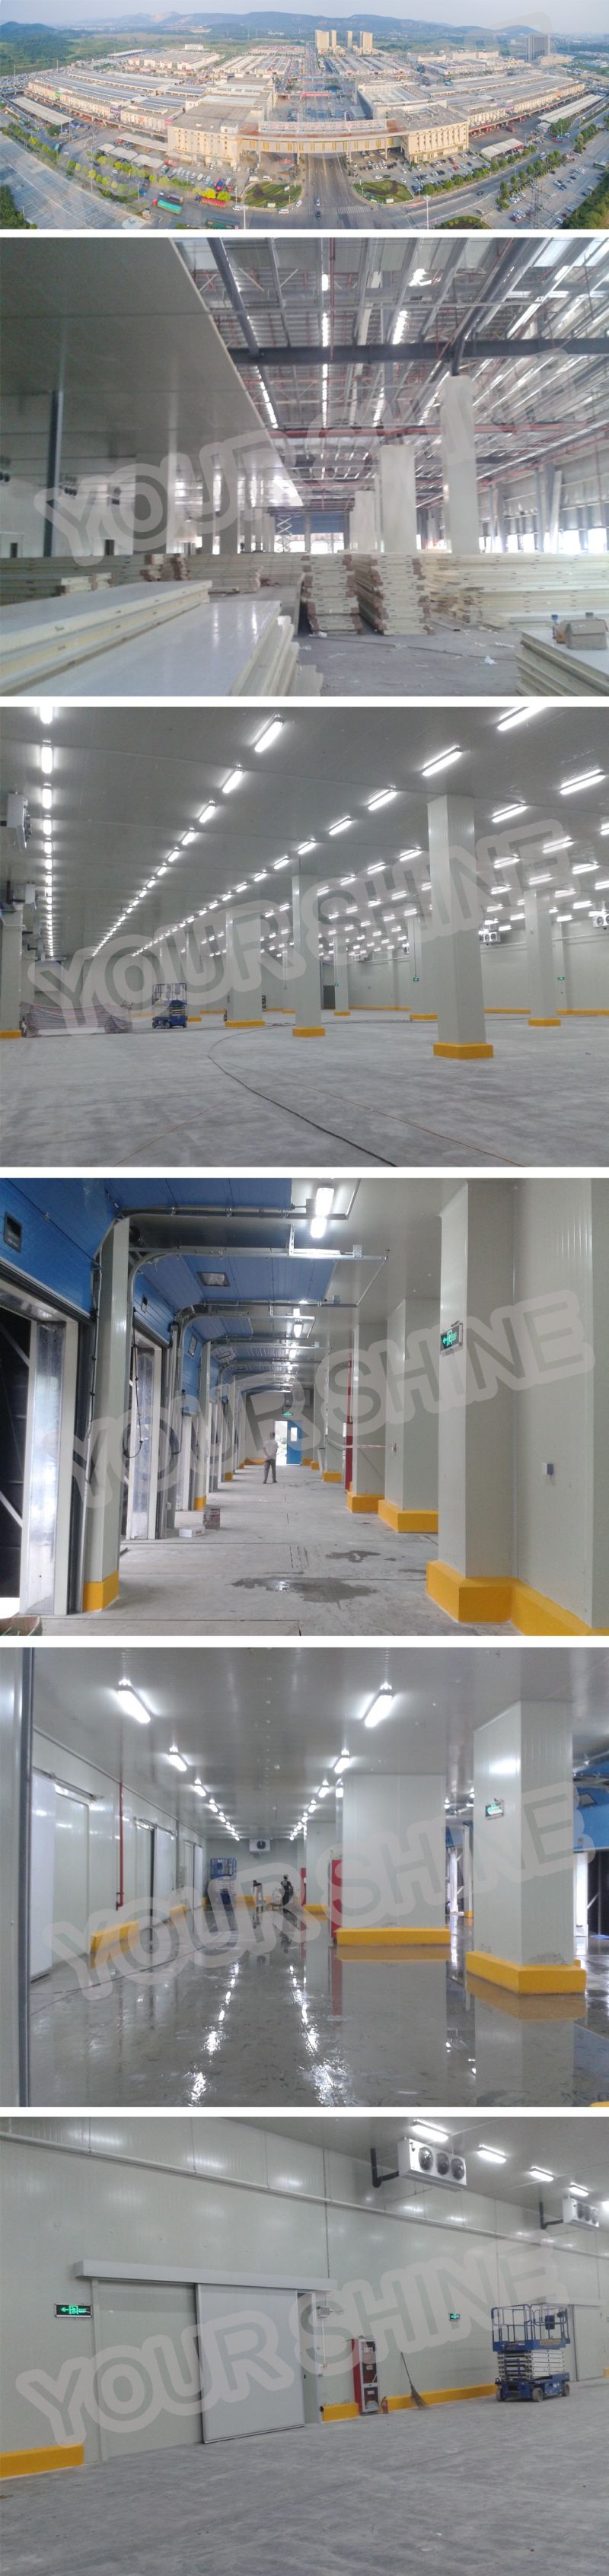 PU Panel for Cold Room, Cold Room Panel, Cold Room Sandwich Panel Supermarket Cold Room